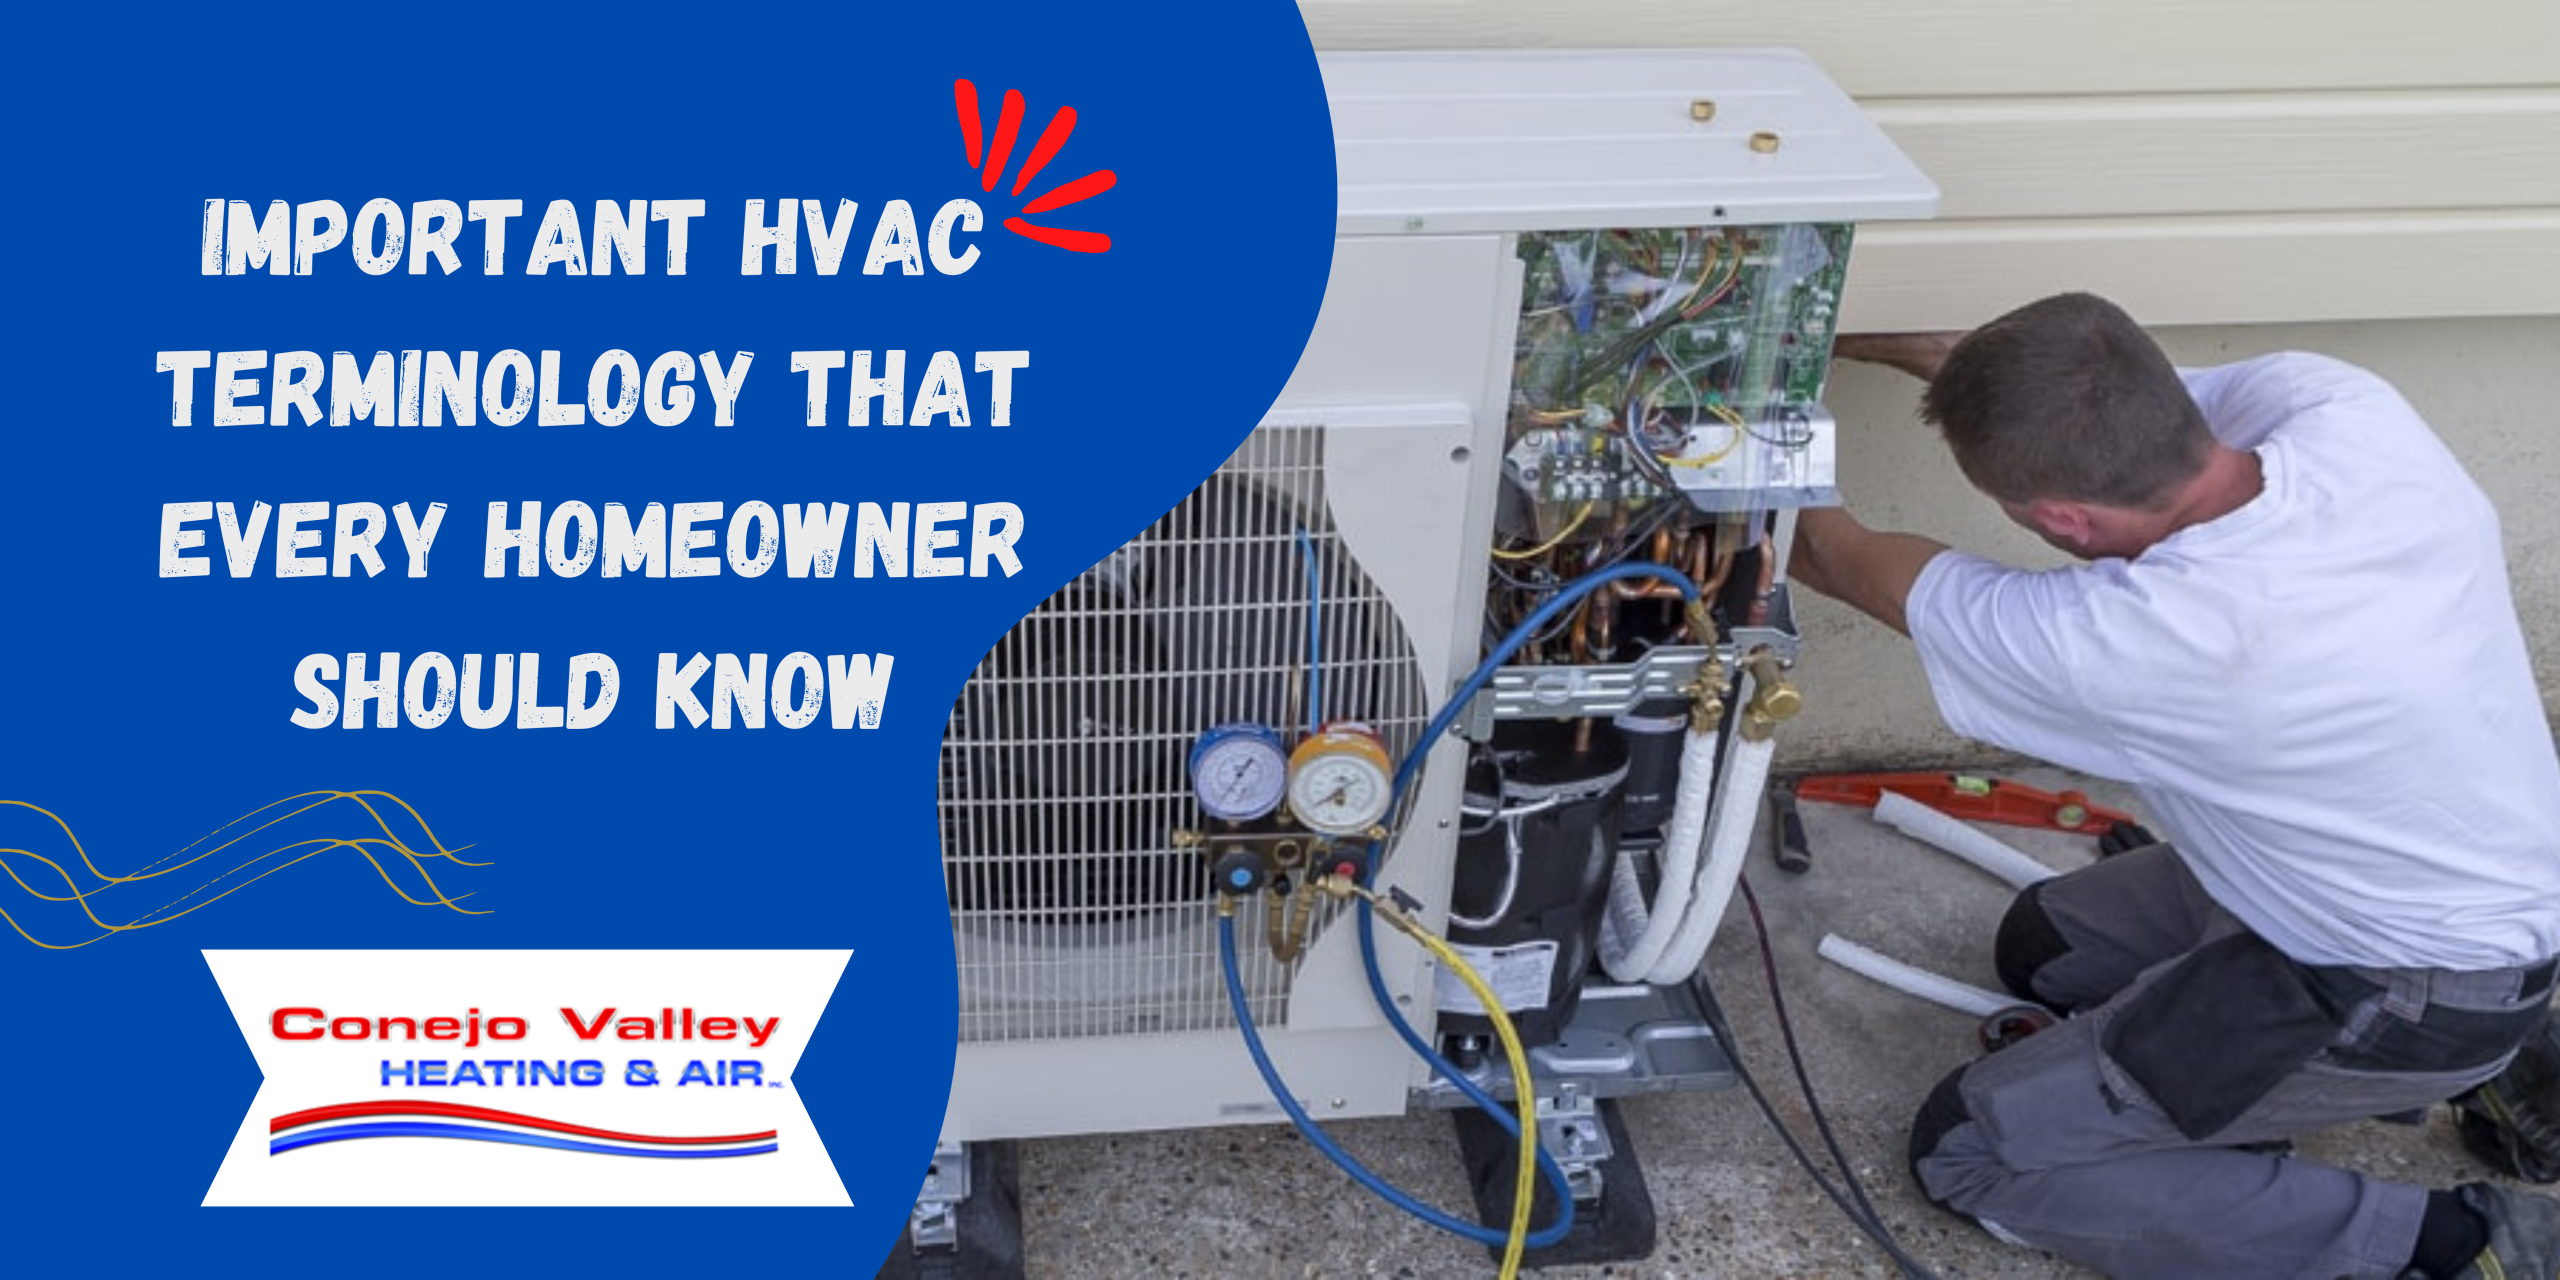 Important HVAC Terminology that Every Homeowner Should Know